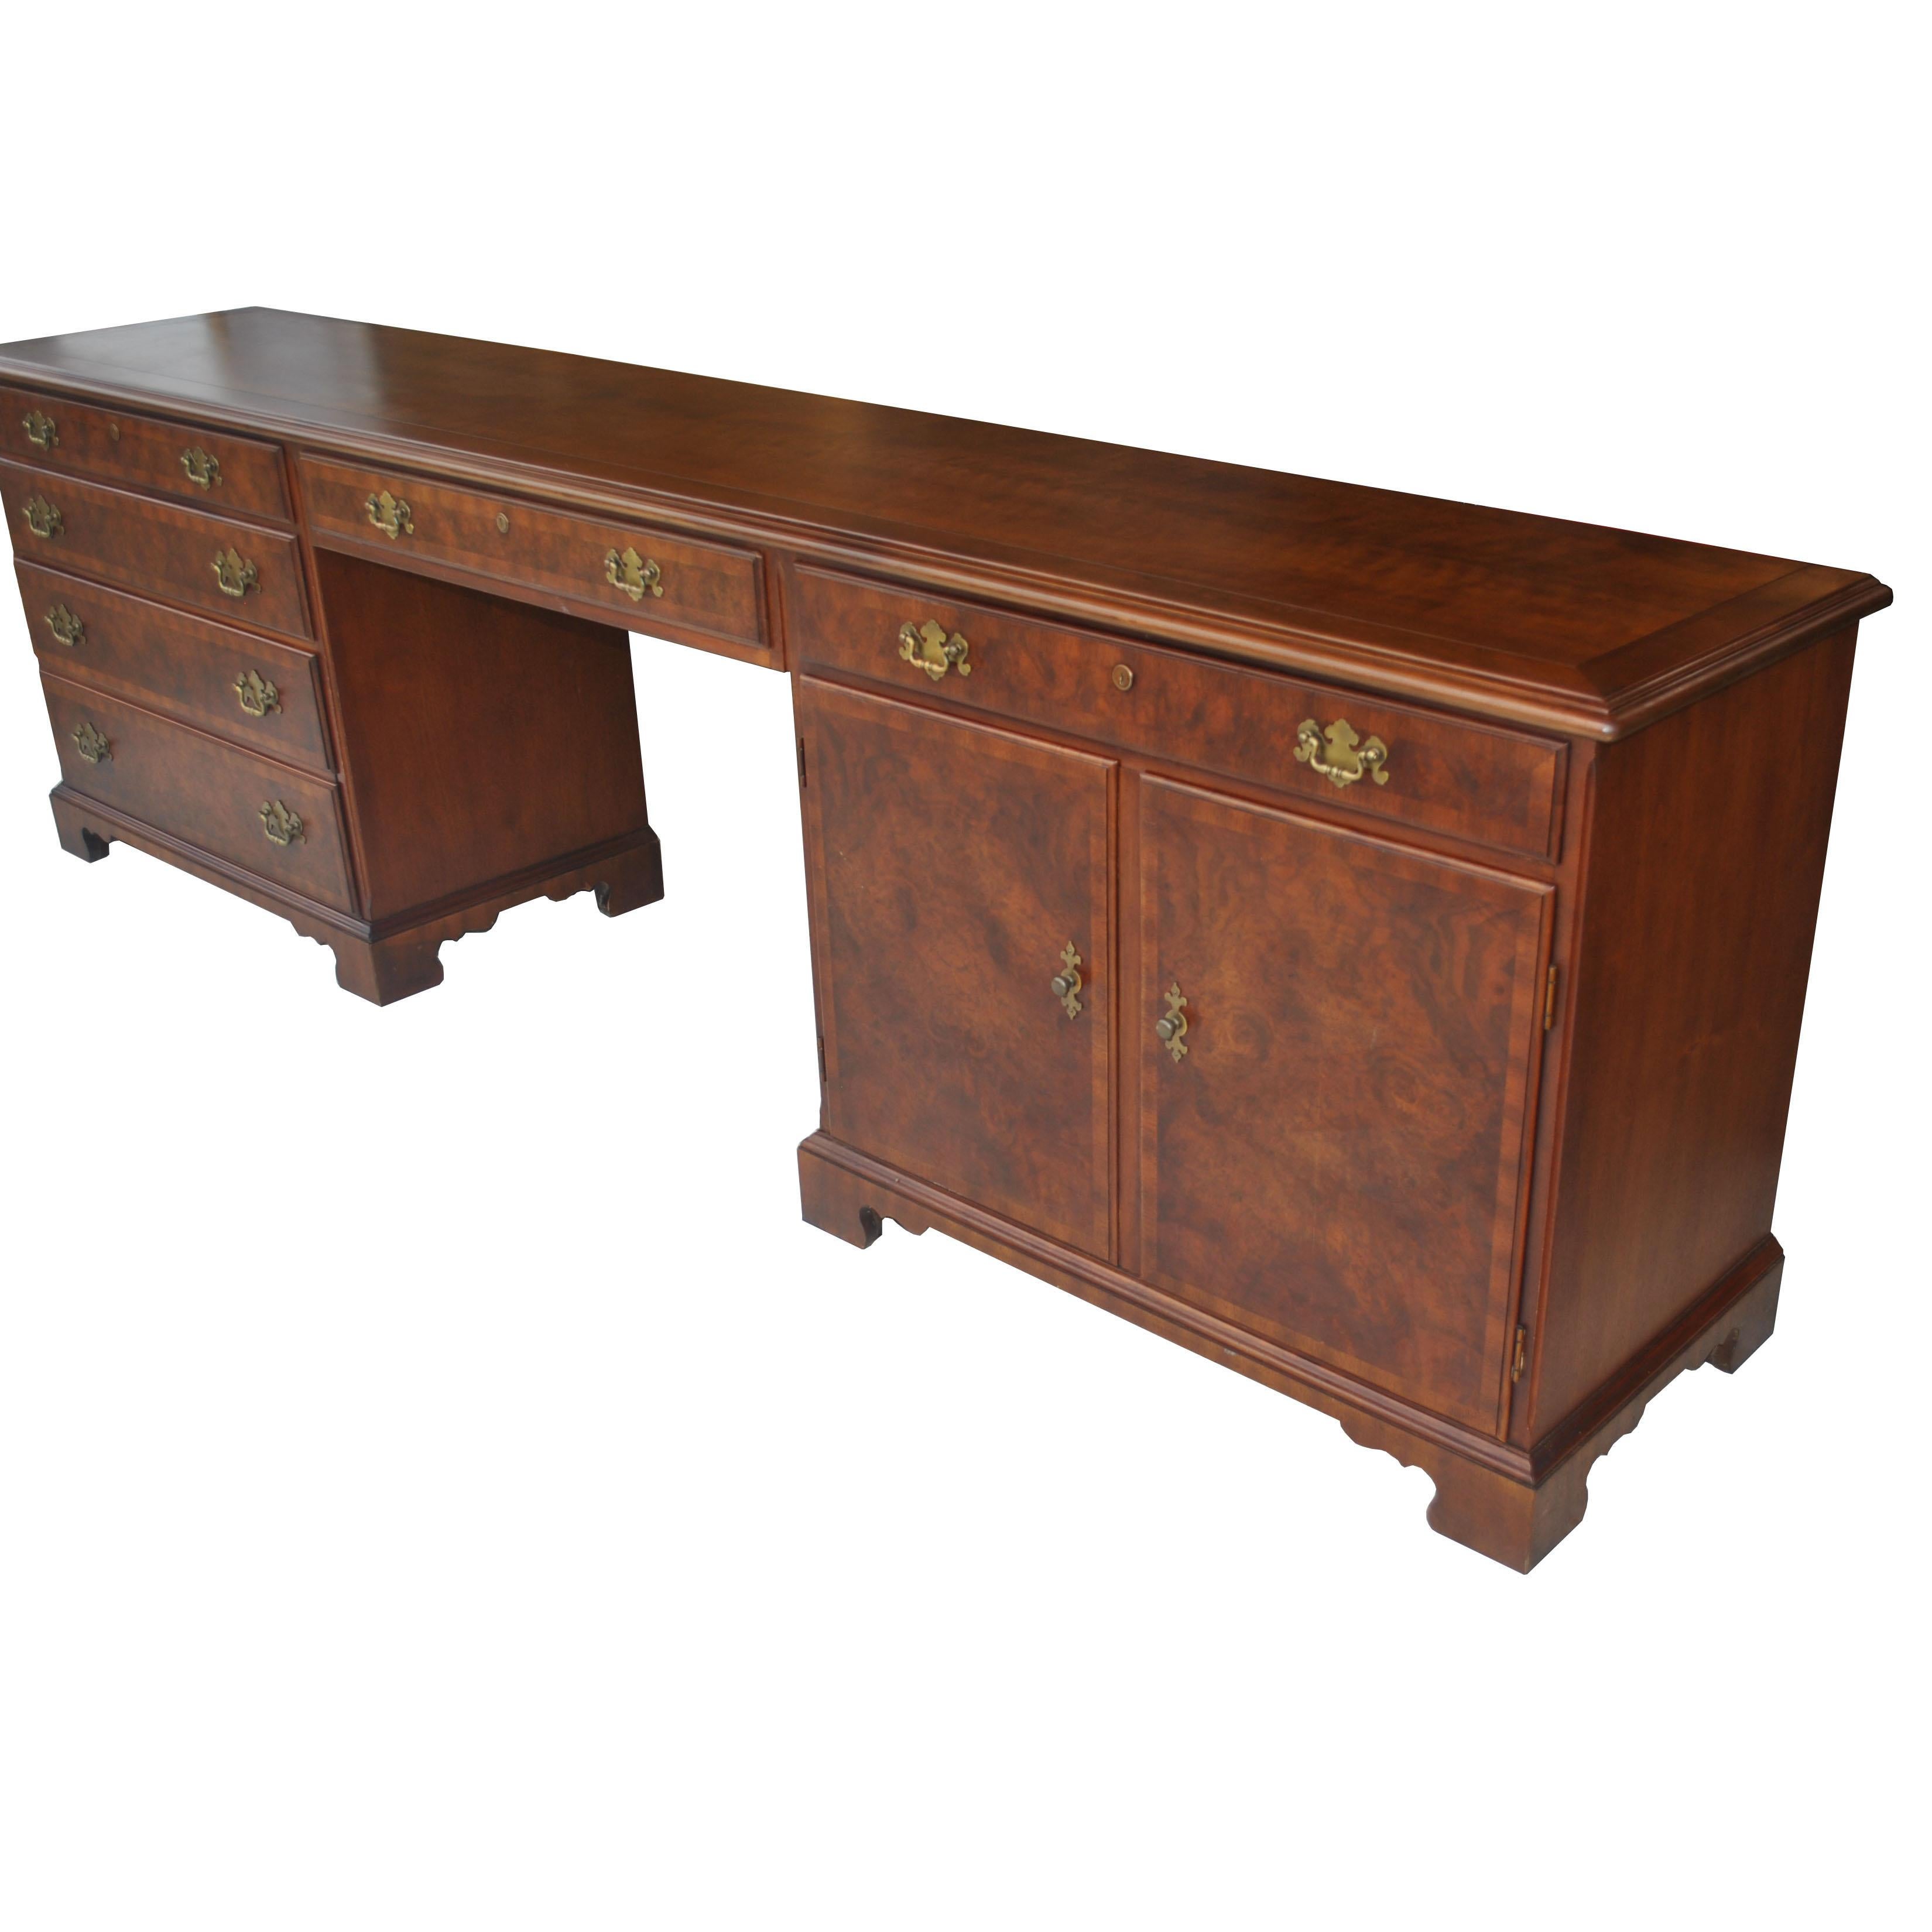 8.5 FT vintage midcentury Widdicomb Burl walnut campaign kneehole credenza


Large knee-hole credenza desk by John Widdicomb. Campaign -style with brass handles. Nine drawers including dual file drawers and roomy cabinets.